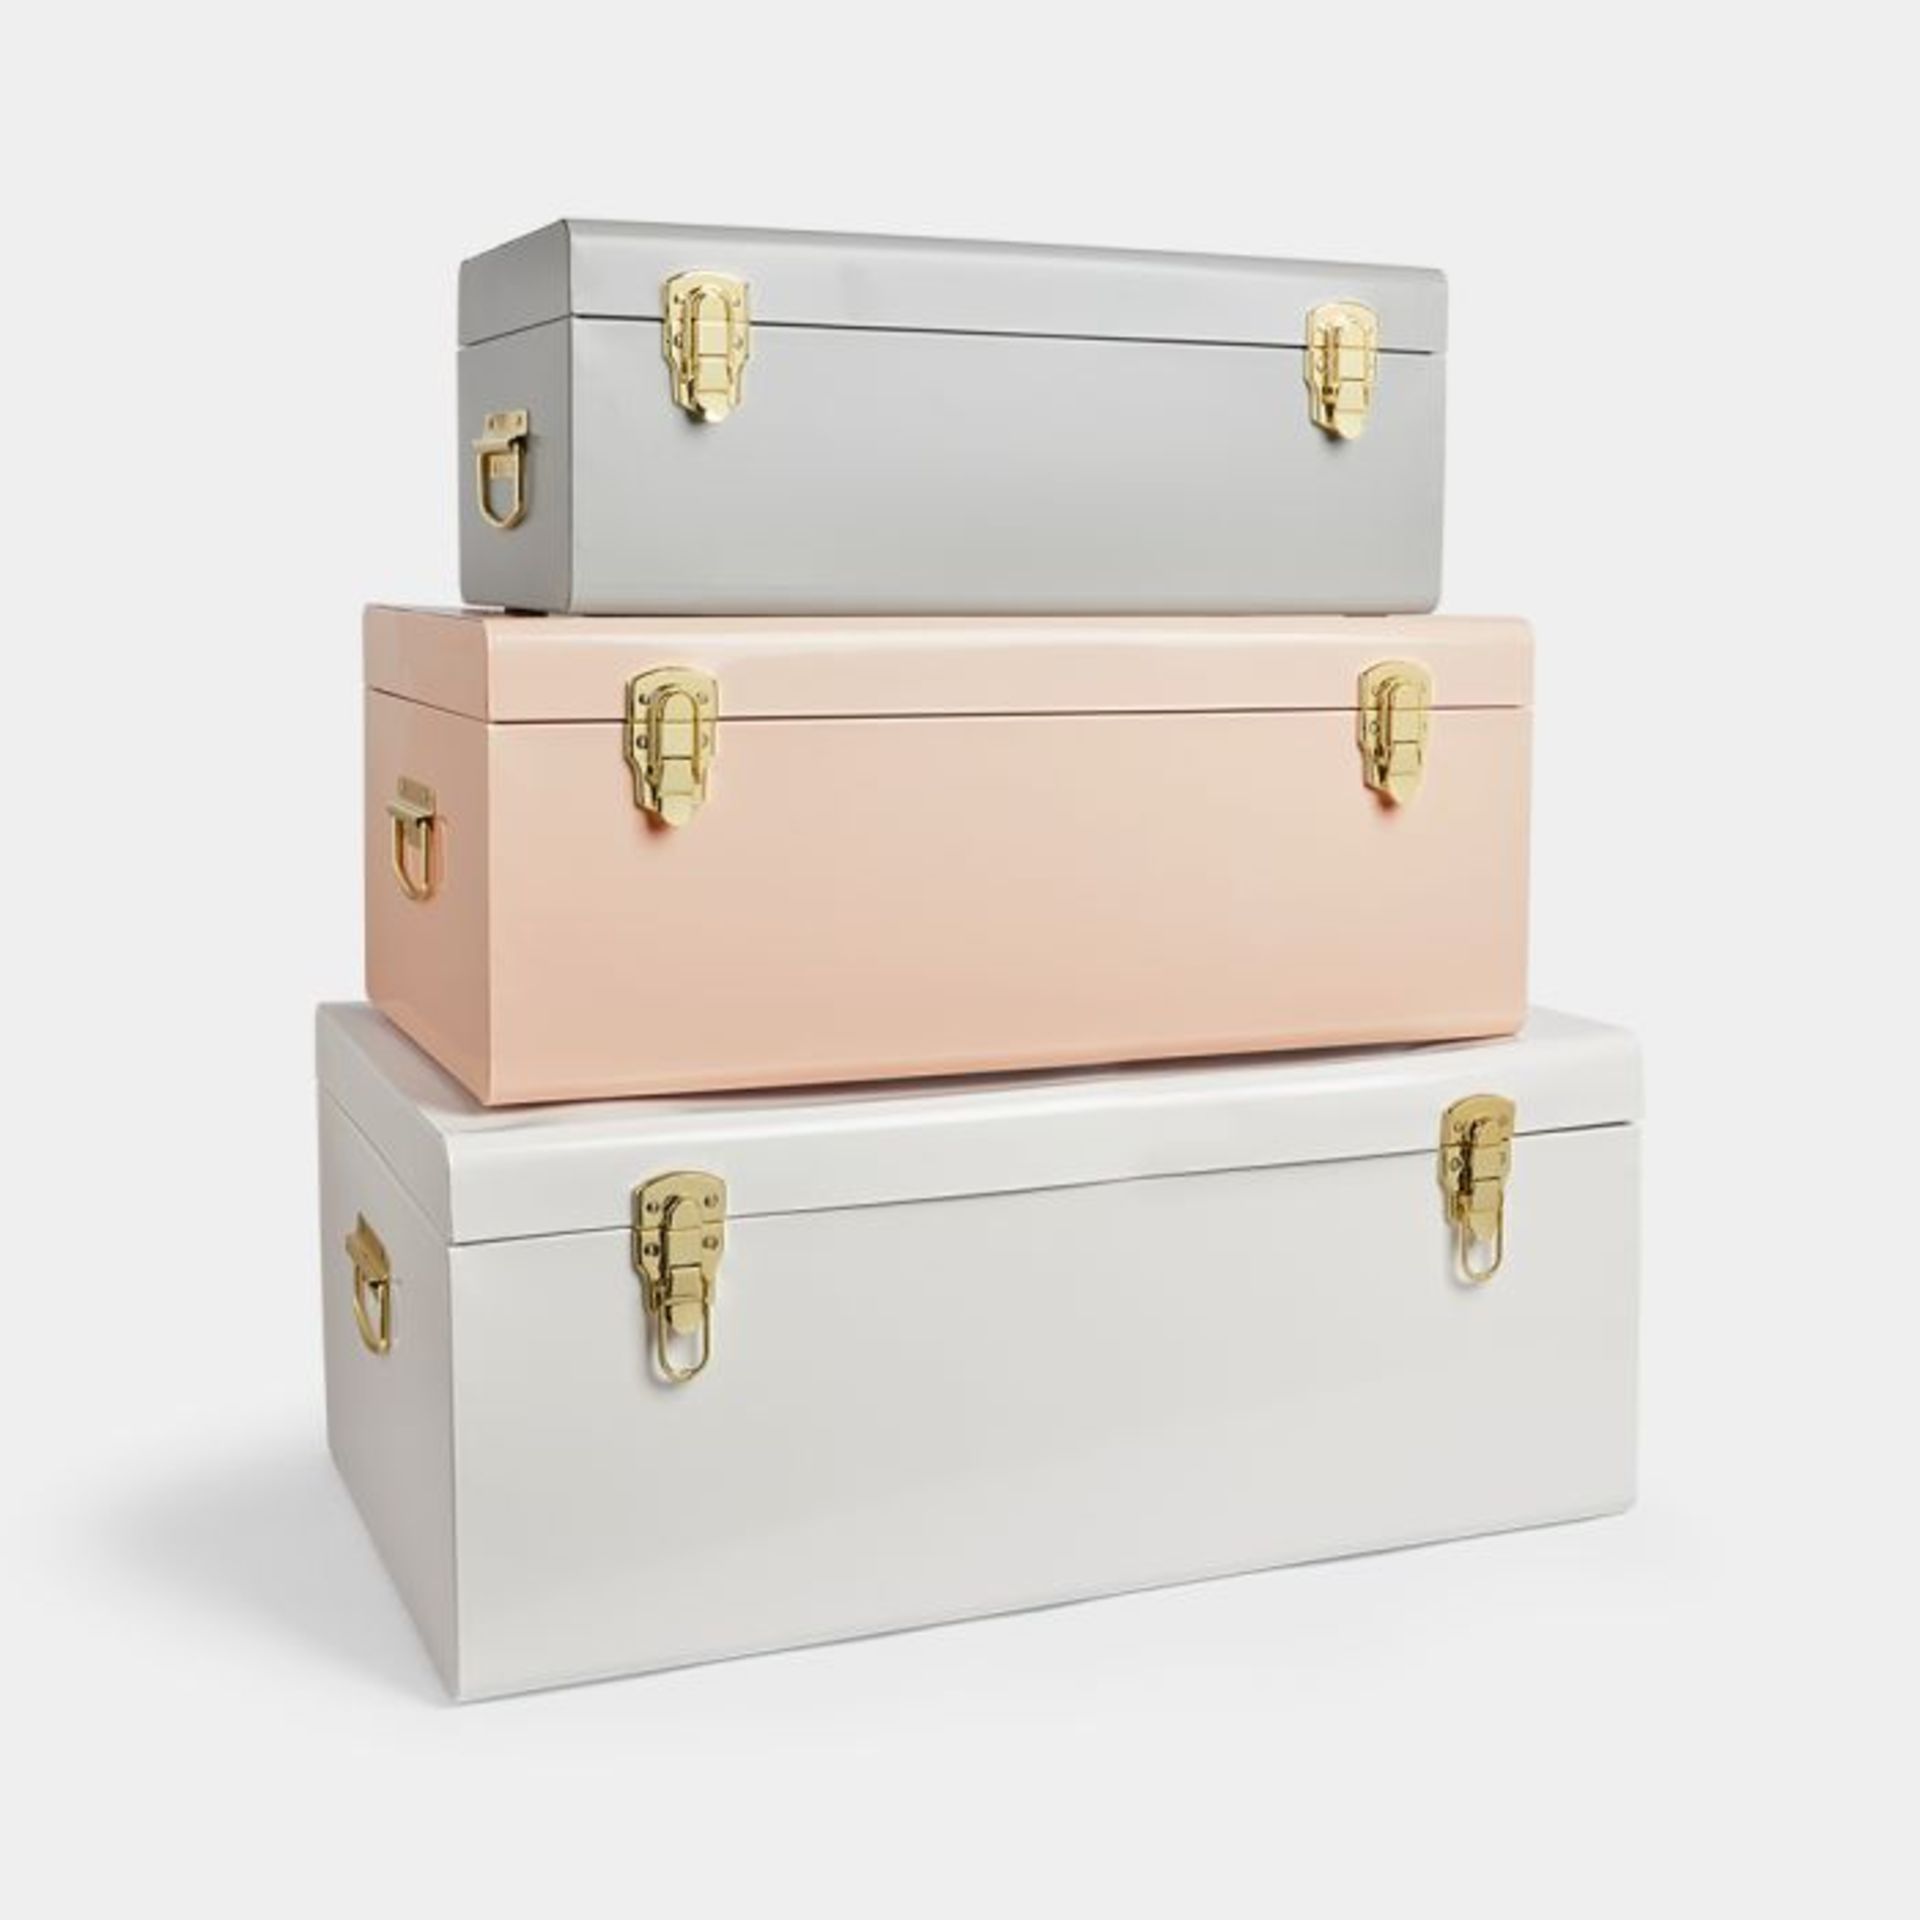 Set of 3 Metal Storage Trunks. - ER33. Tidy up your home with these practical yet stylish vintage